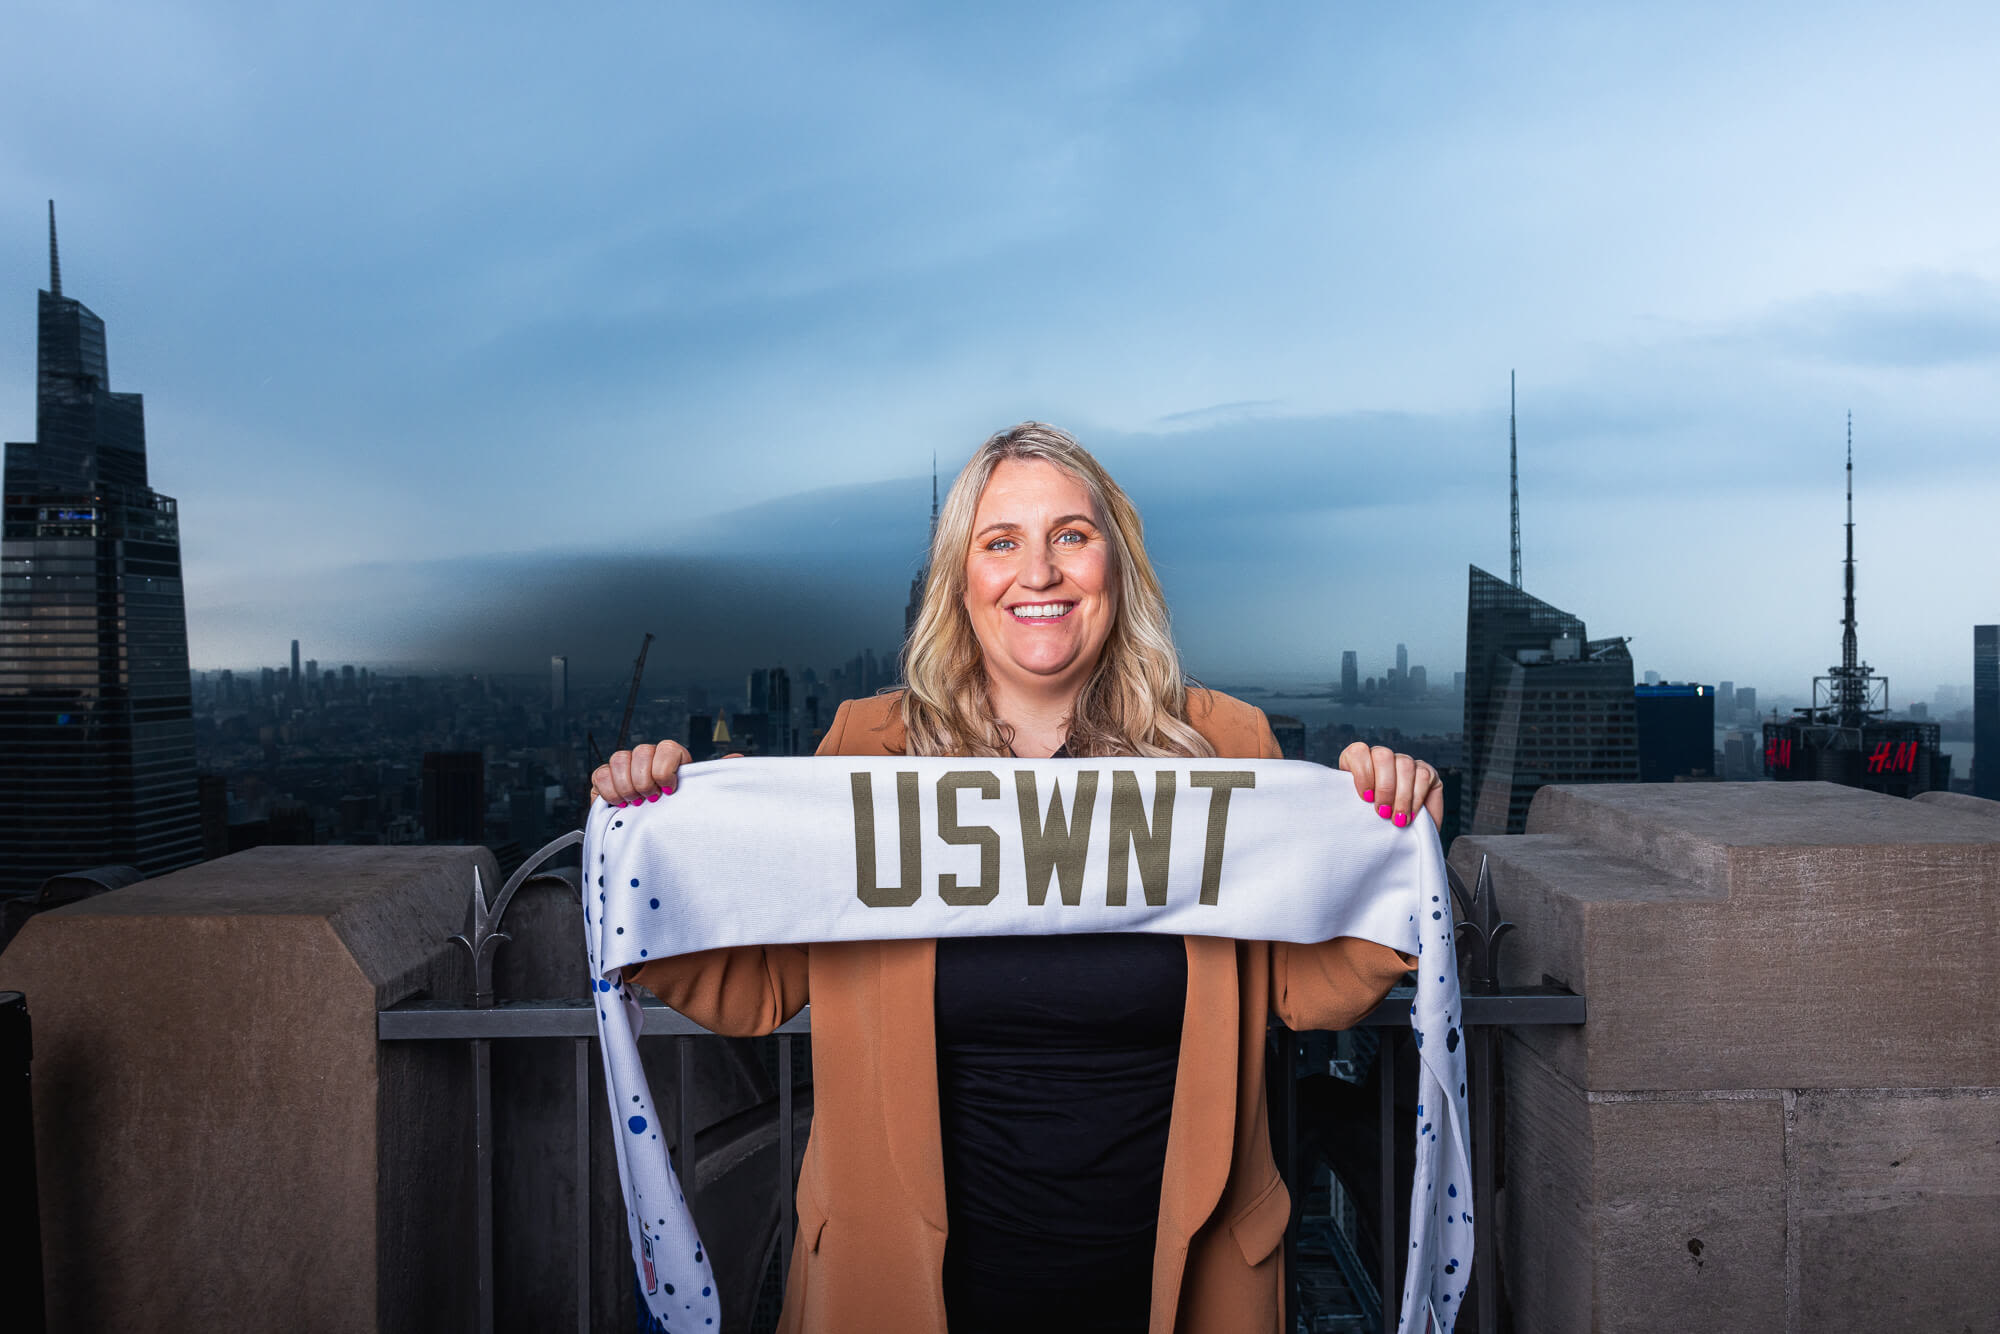 USWNT head coach Emma Hayes: 'I’m lucky to be born in England, but made in America'